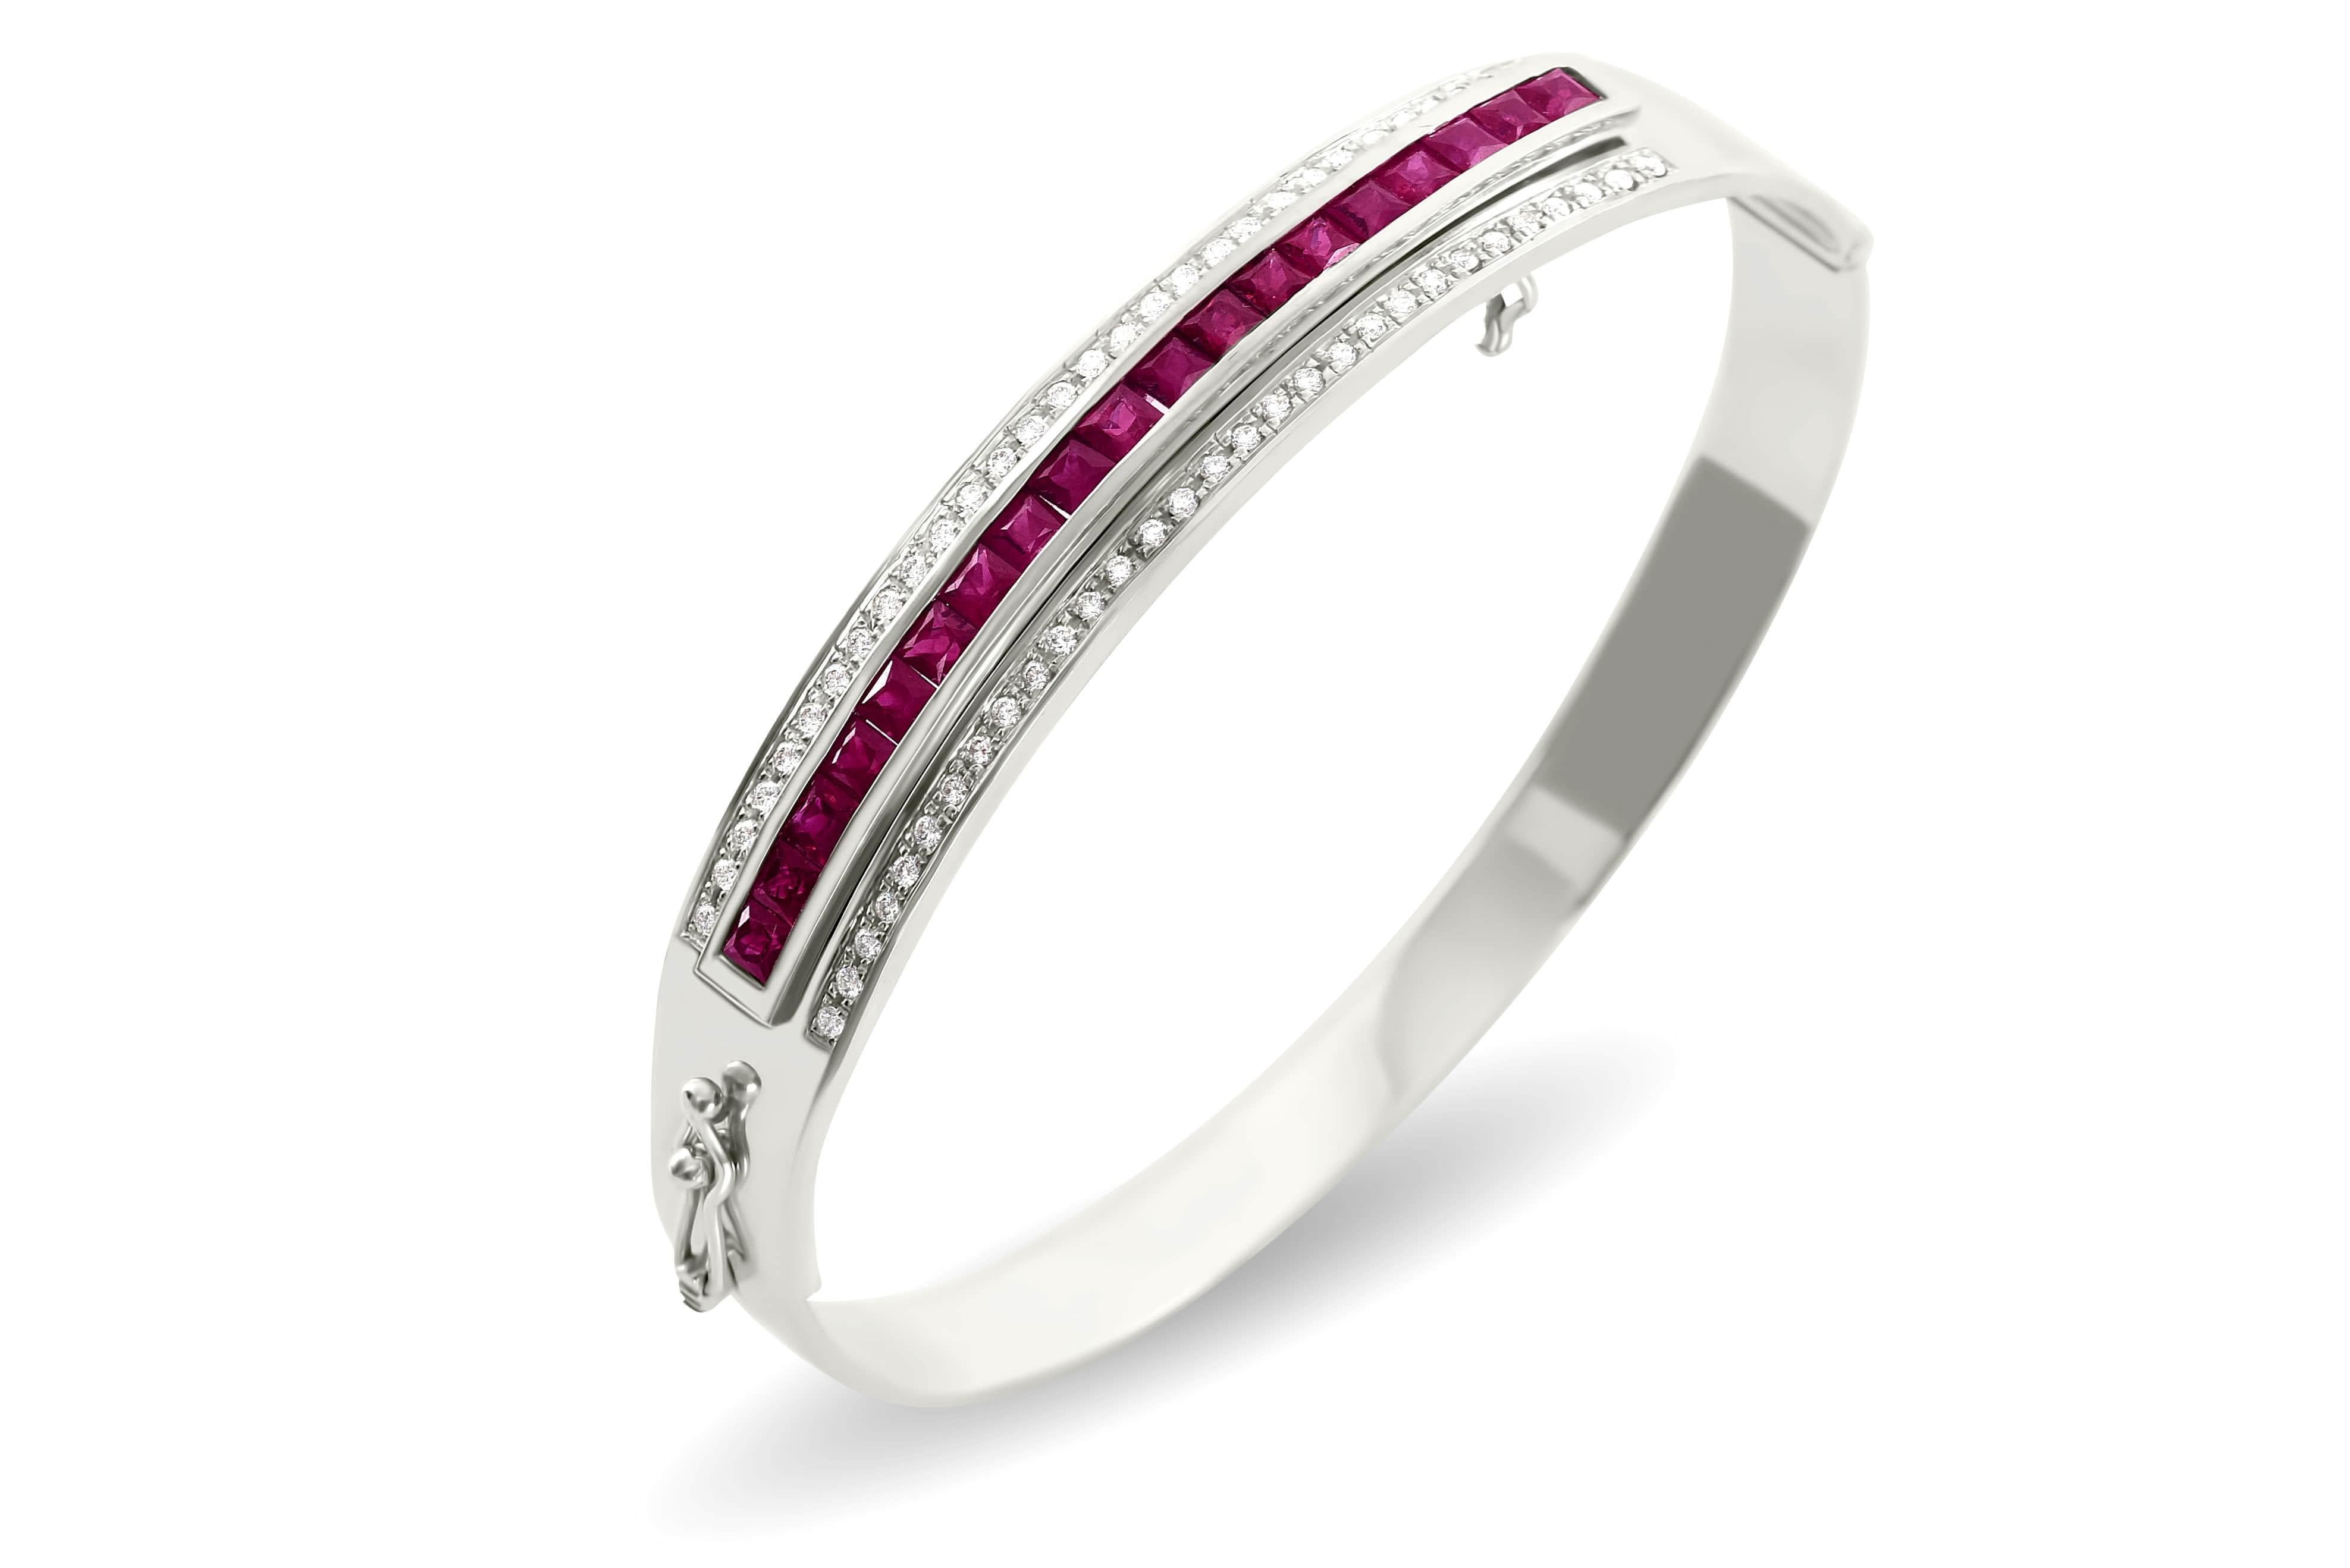 This decadent piece features the highest quality brilliant cut diamonds set in solid platinum in an elegant hinged oval bangle. The featured gemstone insert of your choice is interchangeable, set with magnificent hand selected, calibrated blue